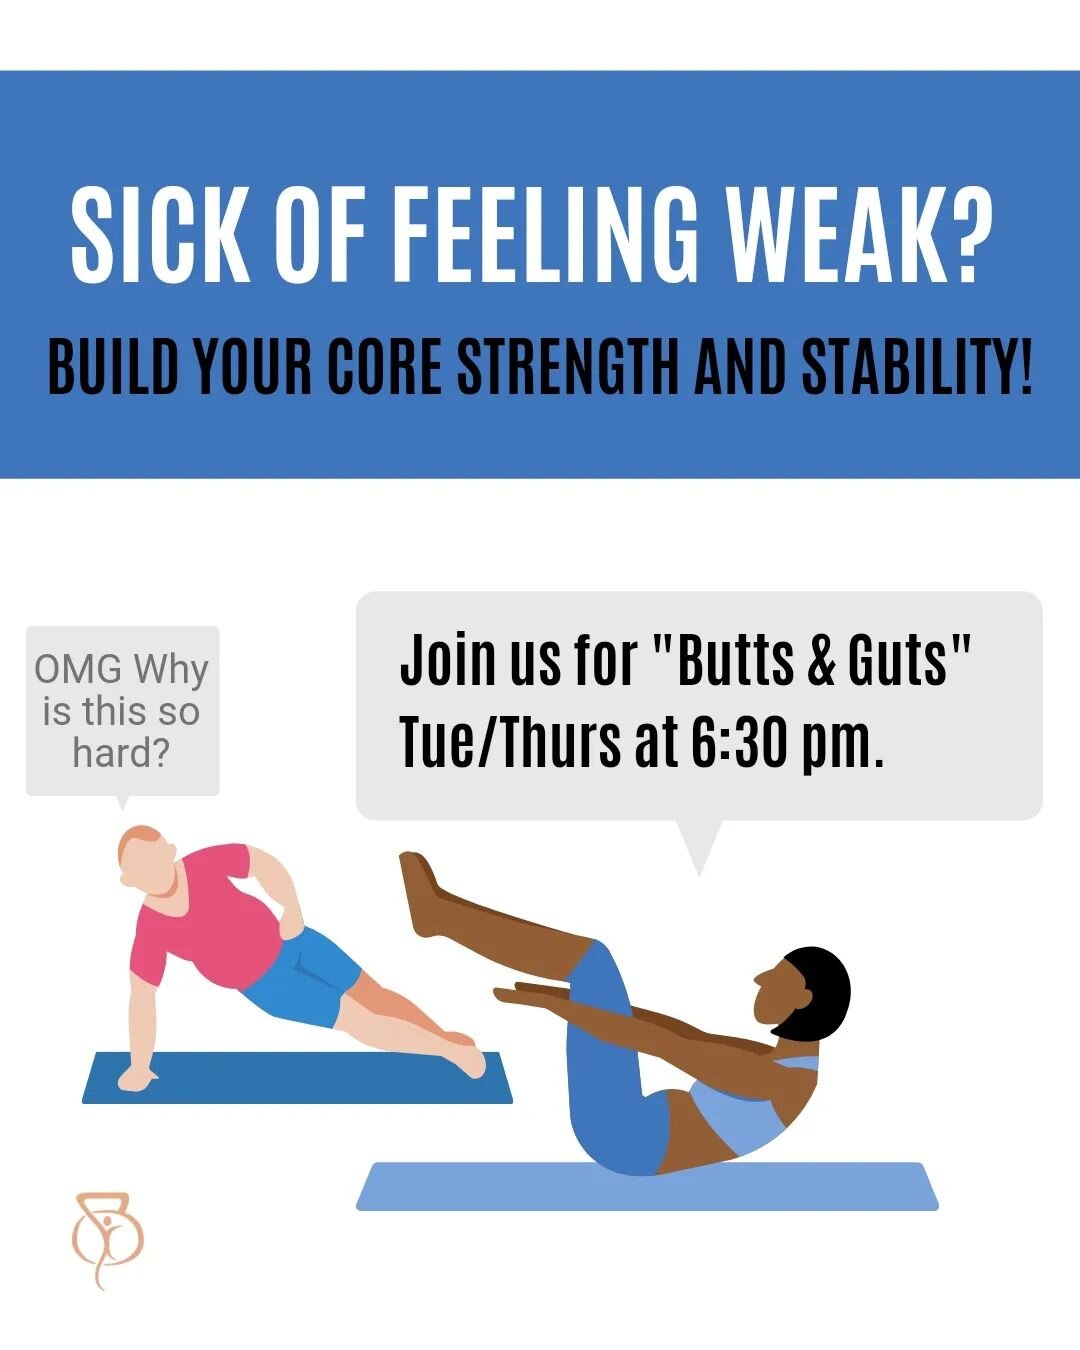 Sick of feeling weak? Tired of throwing out your back picking up the laundry basket? Looking for a fun, low-impact way to start back into a fitness routine?

Your &quot;core&quot; is the foundation for just about everything you do. If it isn't strong